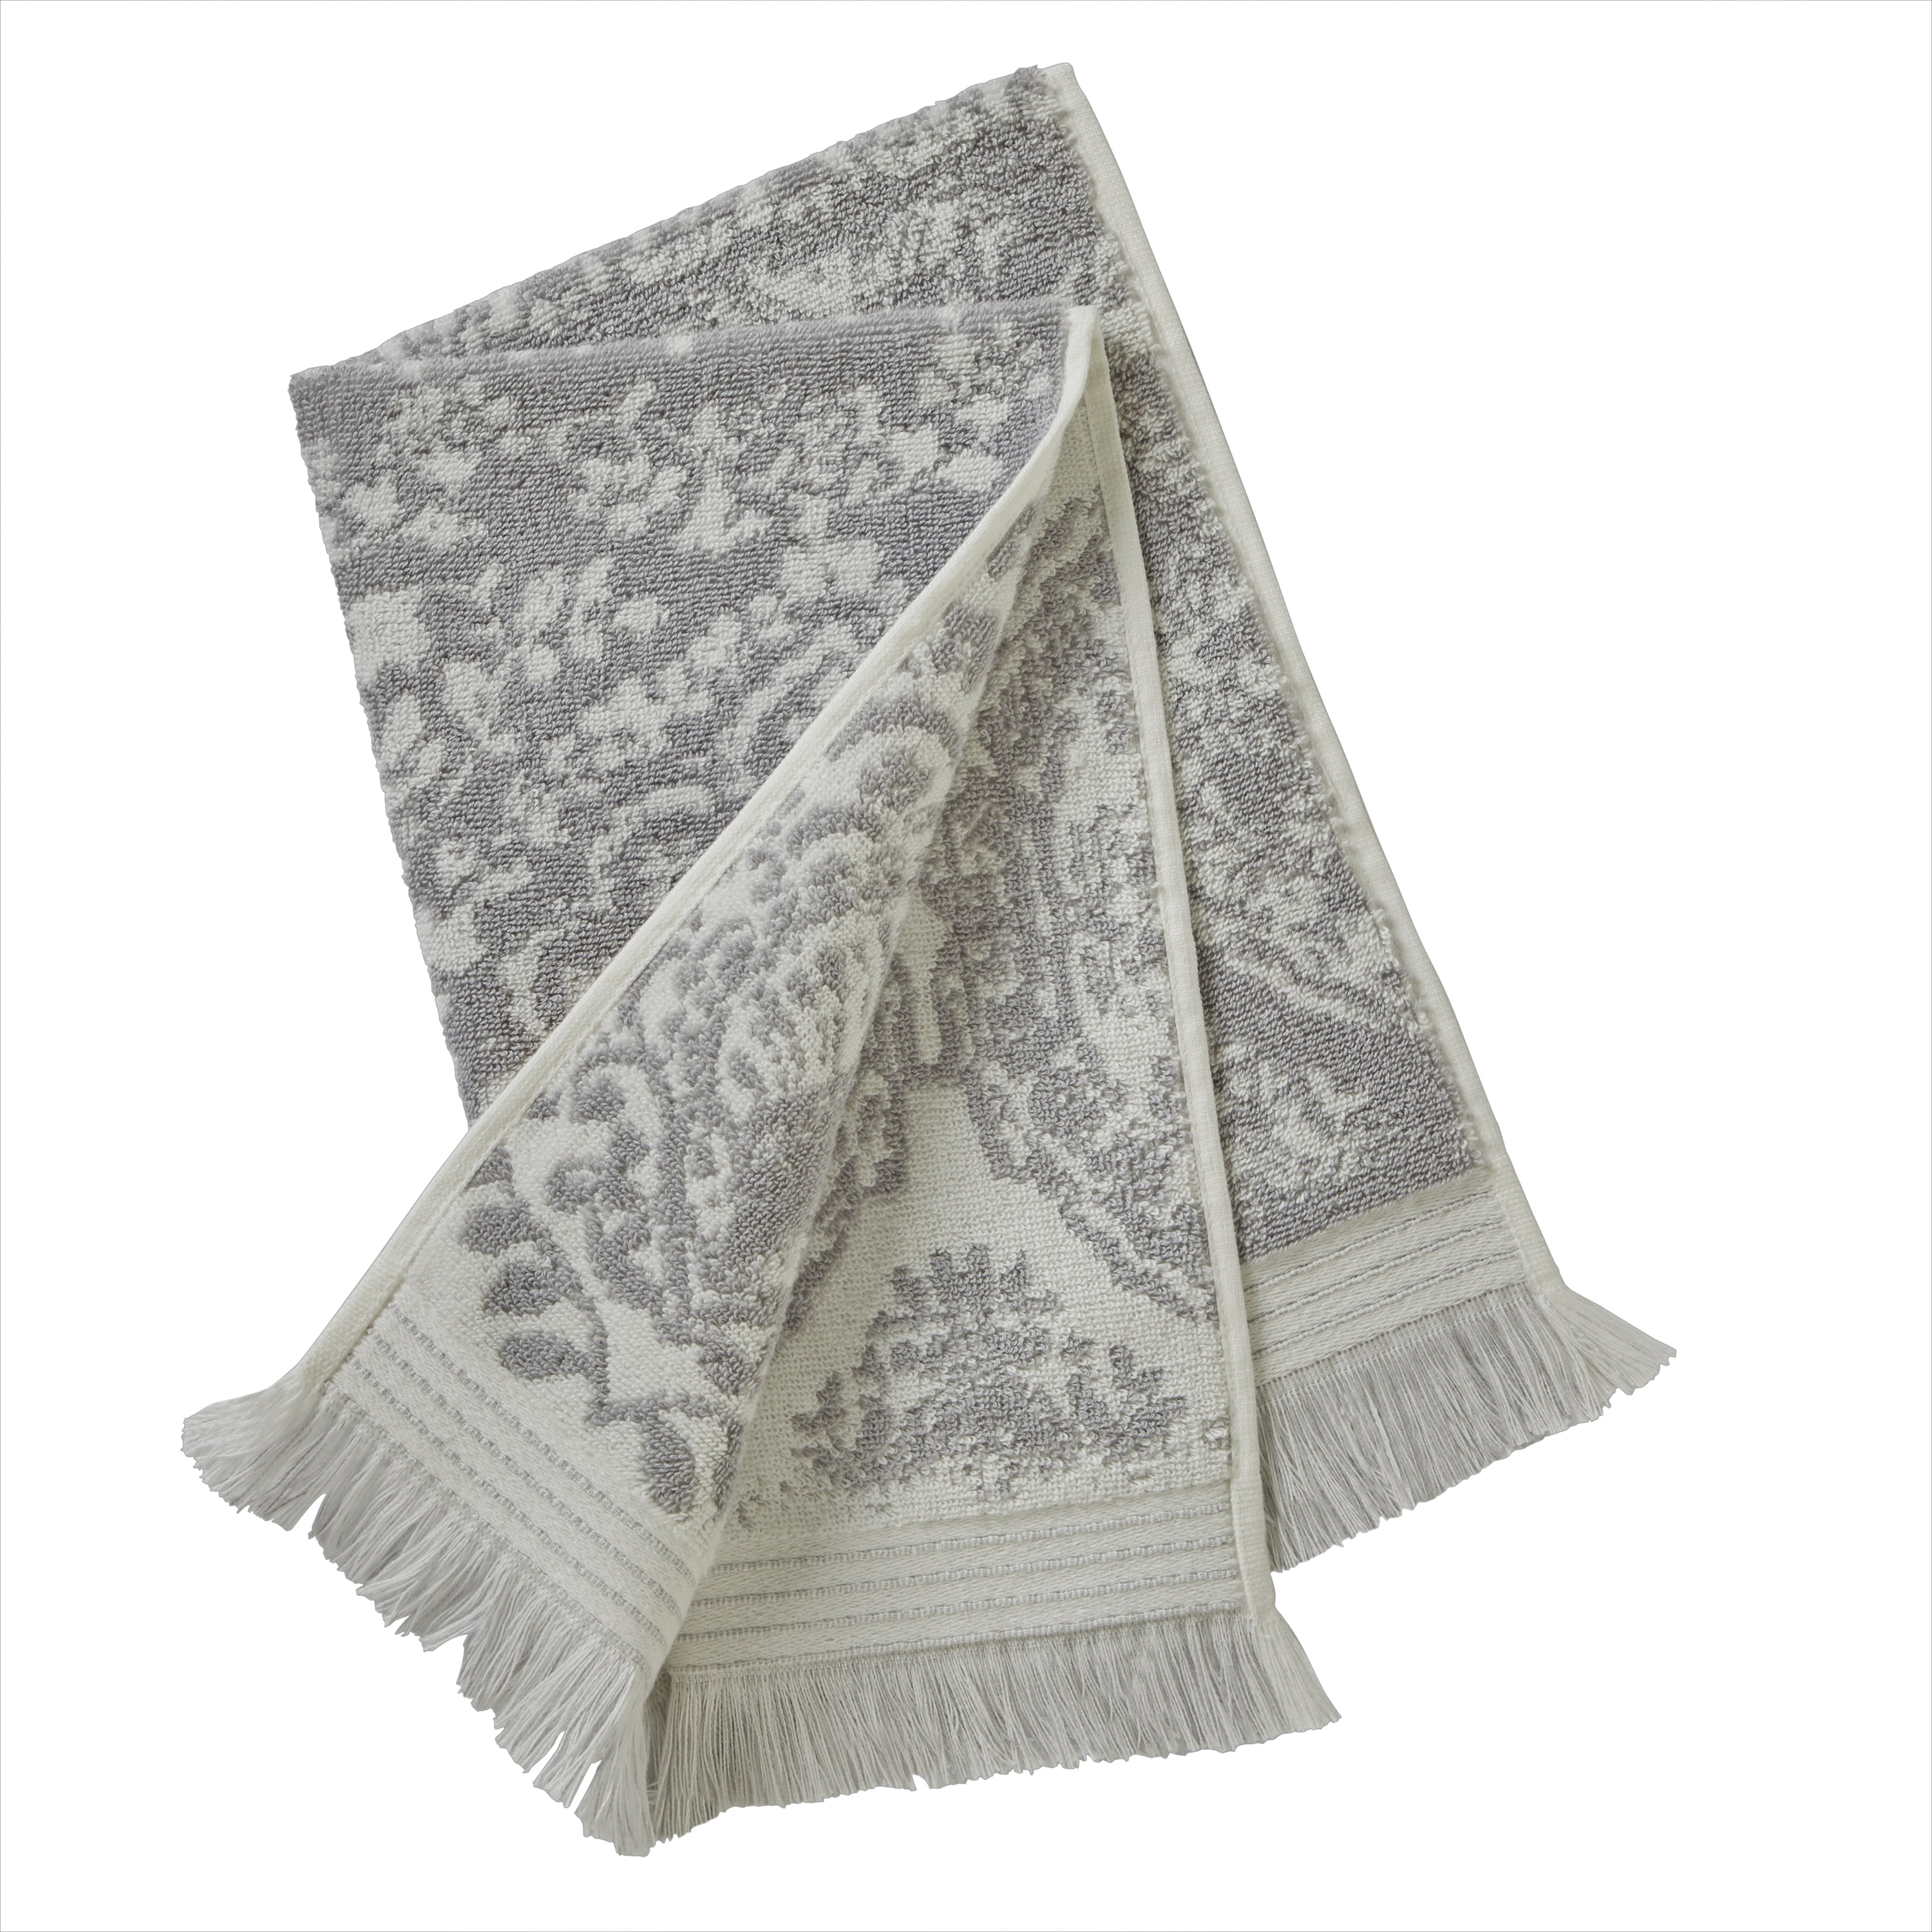 Menlo Gray Sculpted Floral Jacquard Hand Towel by World Market